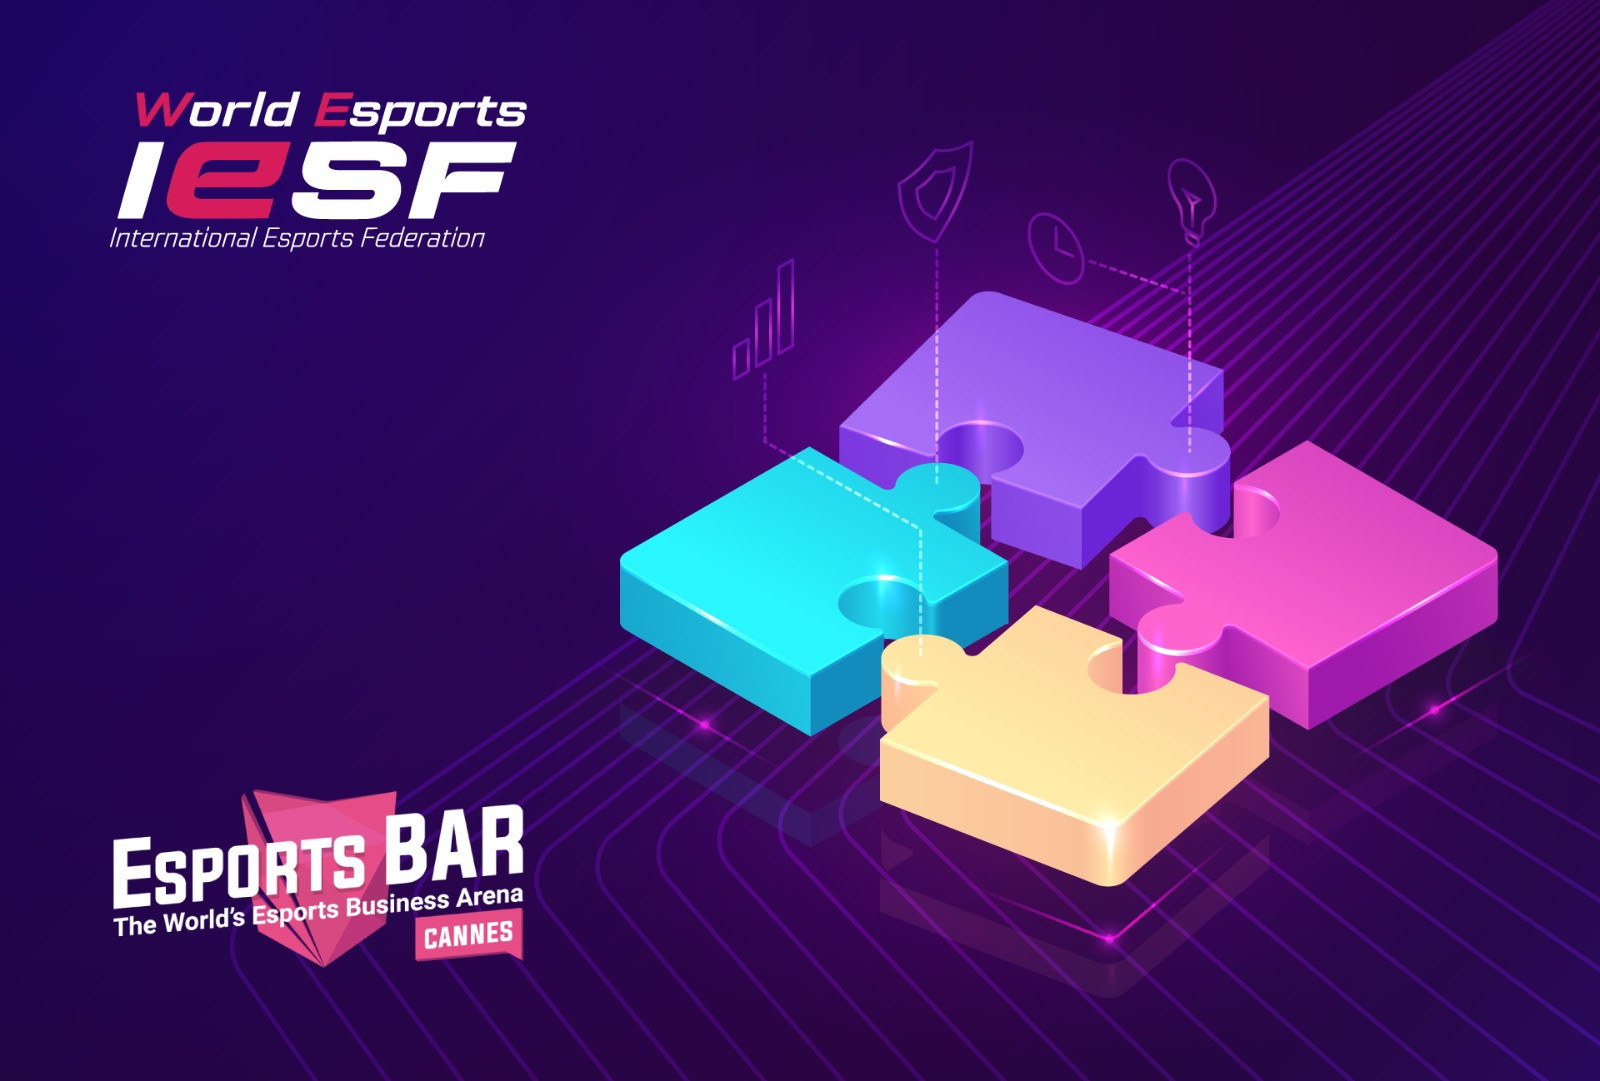 IESF partners with Esports BAR to promote professional esports